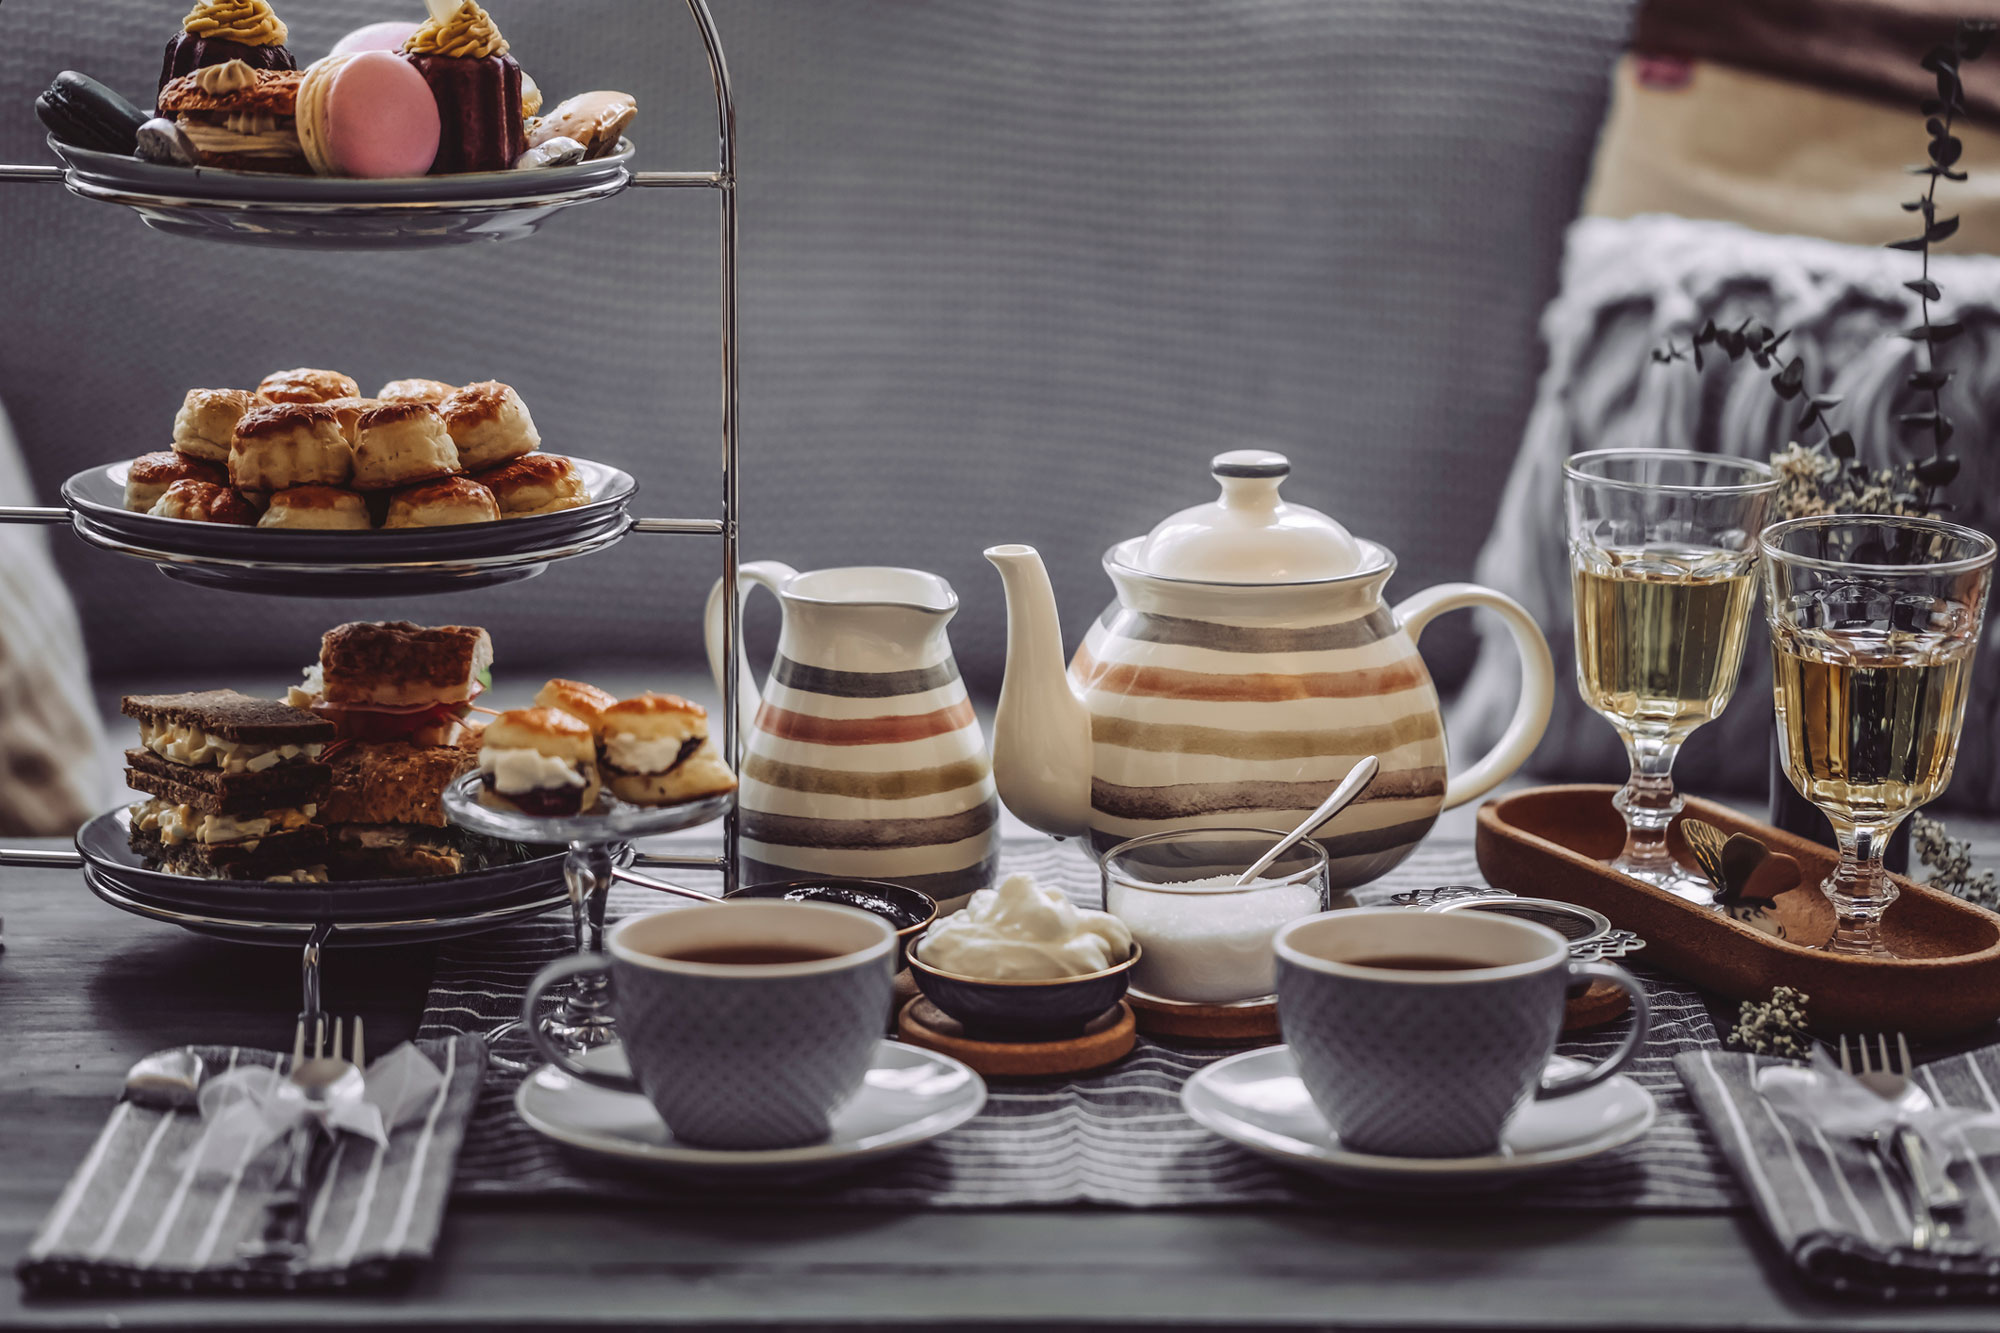 still life shot of table set up for a tea party with tea kettle, cups and small bites